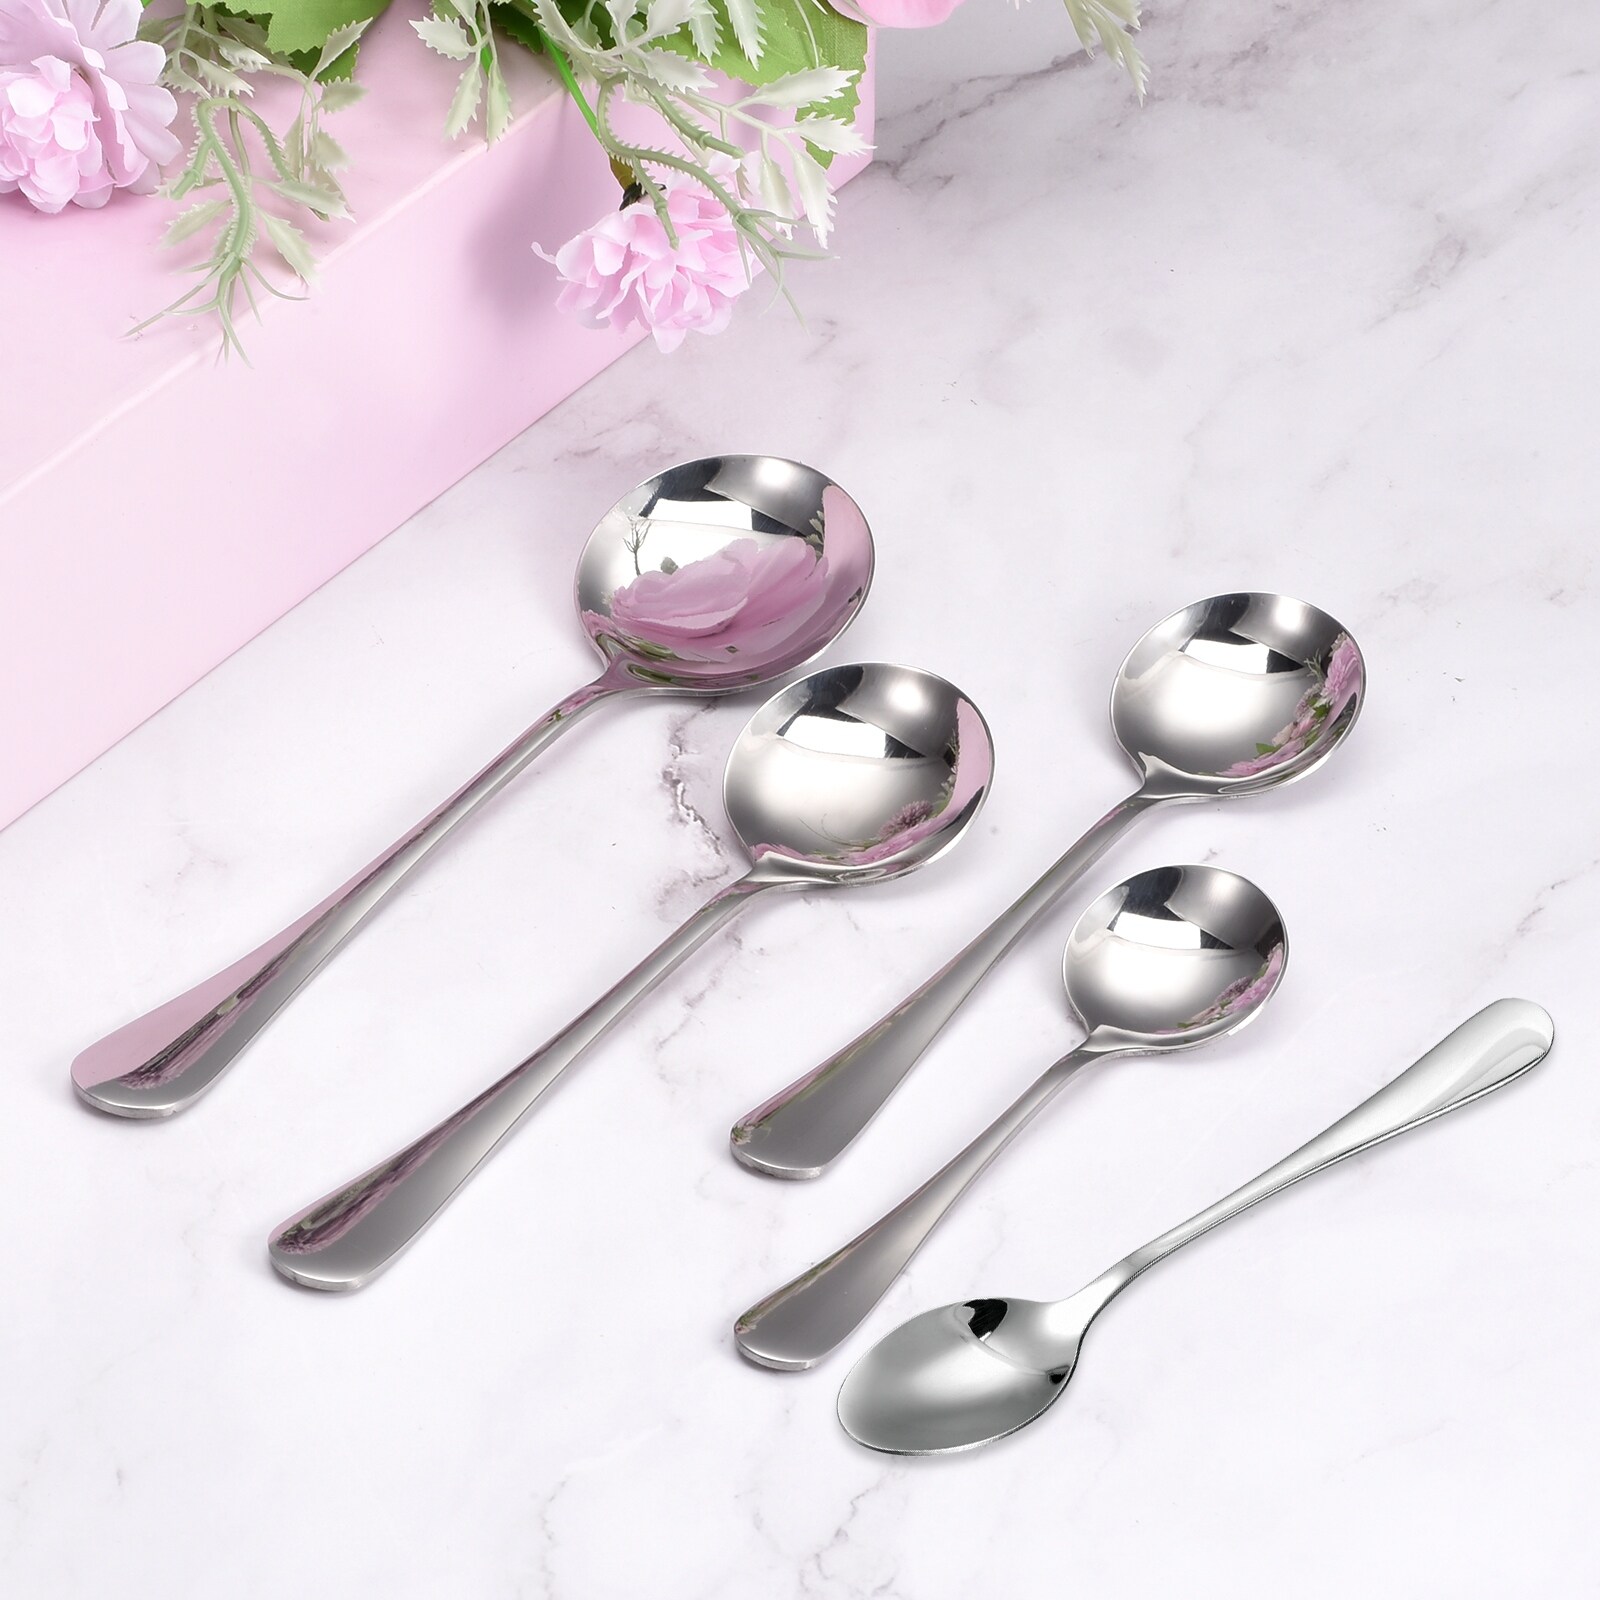 12Pcs 5" Stainless Steel Soup Spoon Tea Spoons Squared Edge Dinner Spoons Silver